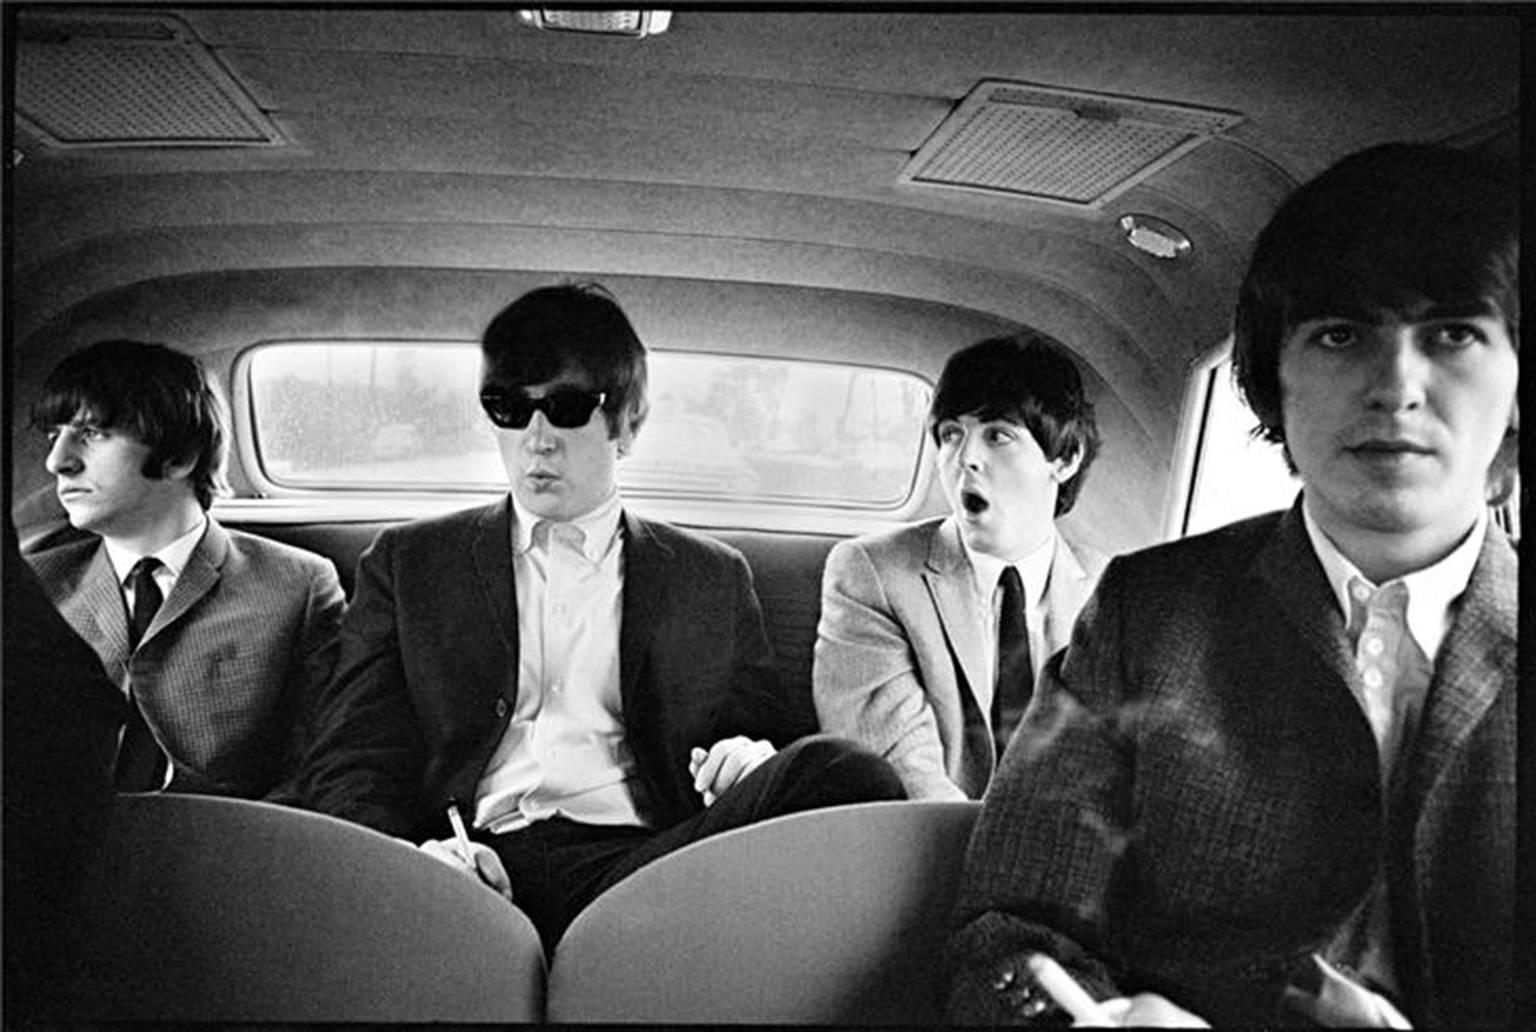 Curt Gunther Black and White Photograph - Beatles in Limo, 1964